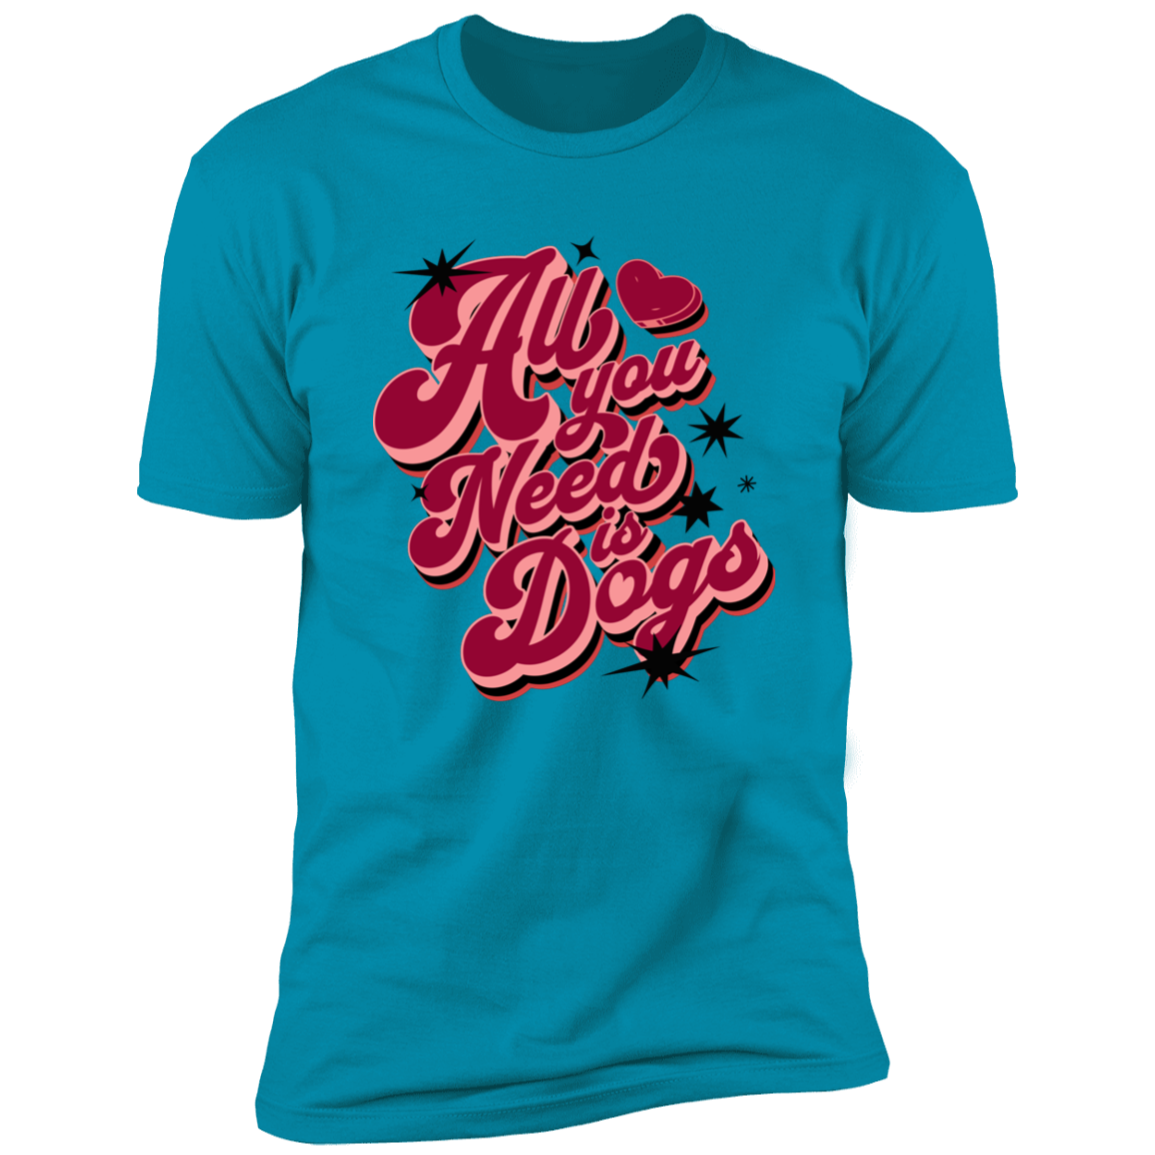 All I Need is Dogs T-shirt, Dog Shirt for humans, in turquoise